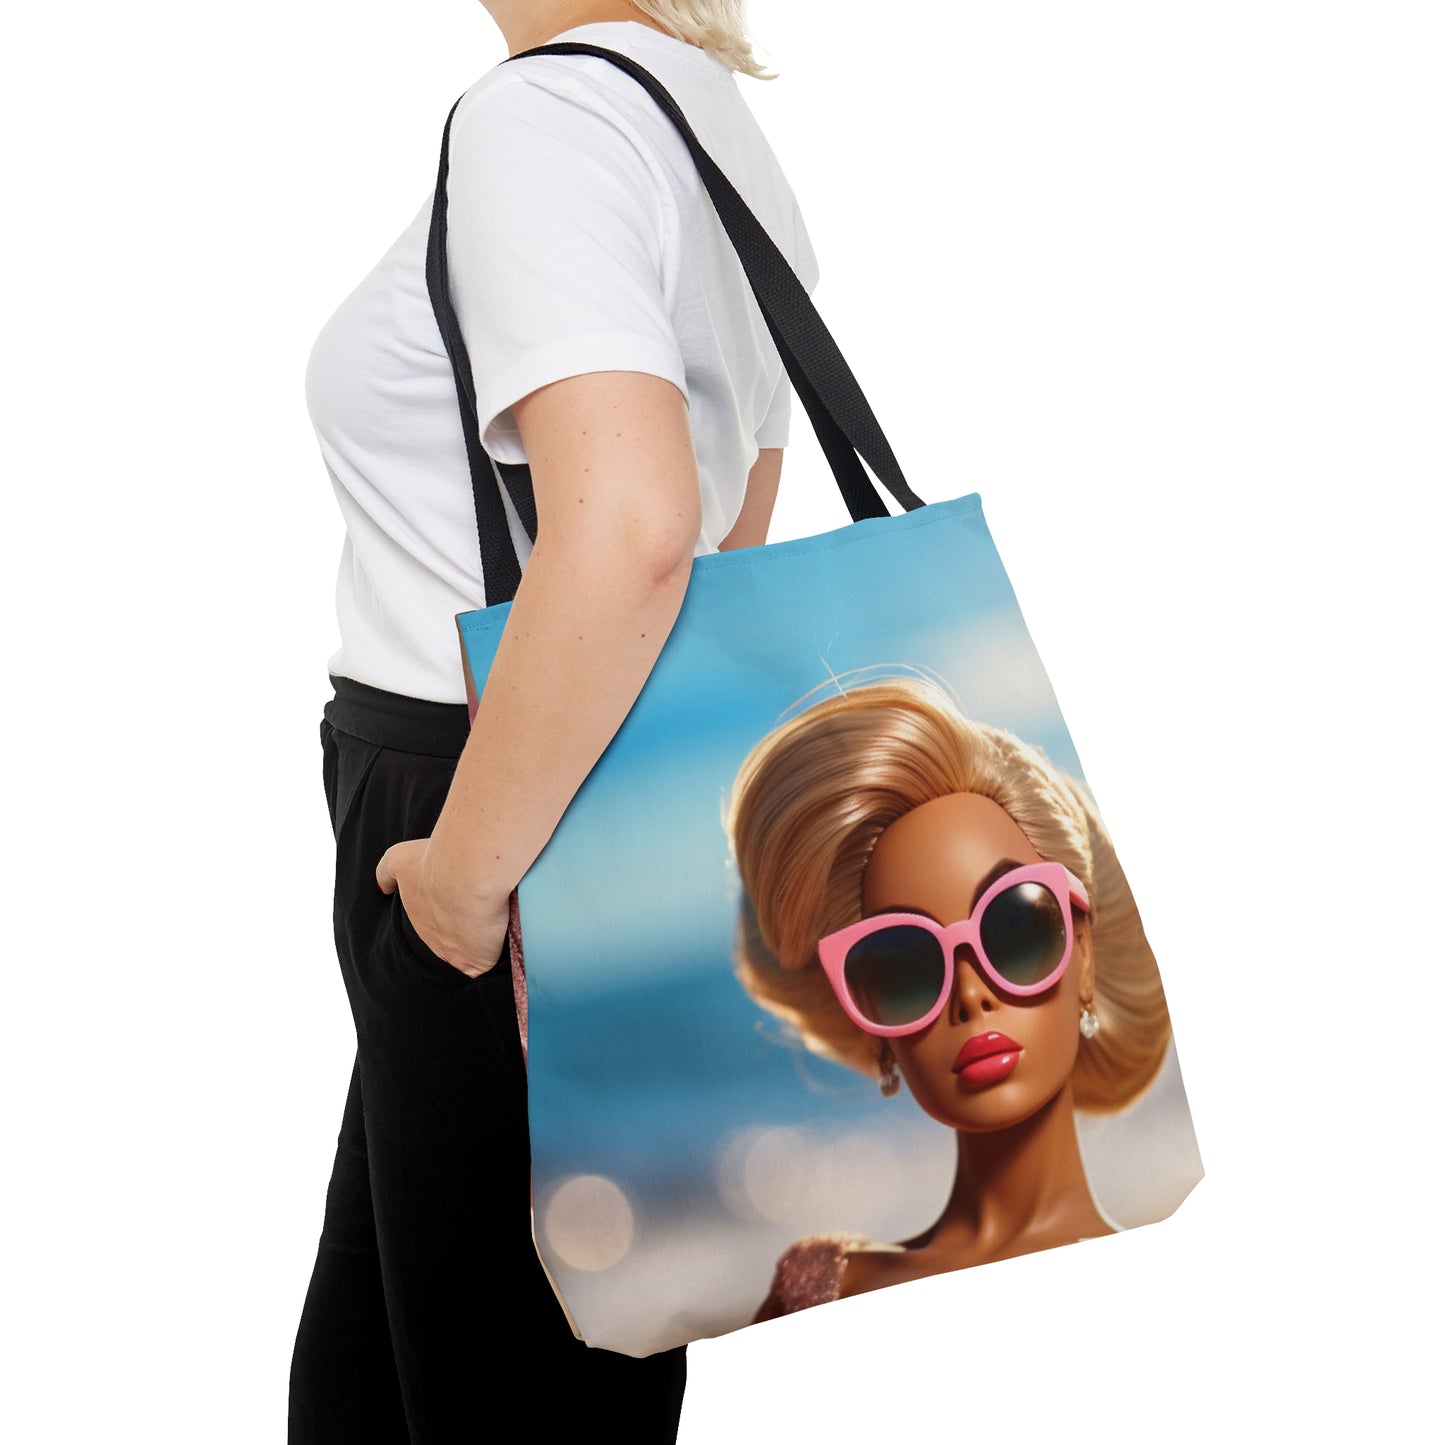 Barbie on the Beach Tote Bag with Sunglasses - Limited Edition